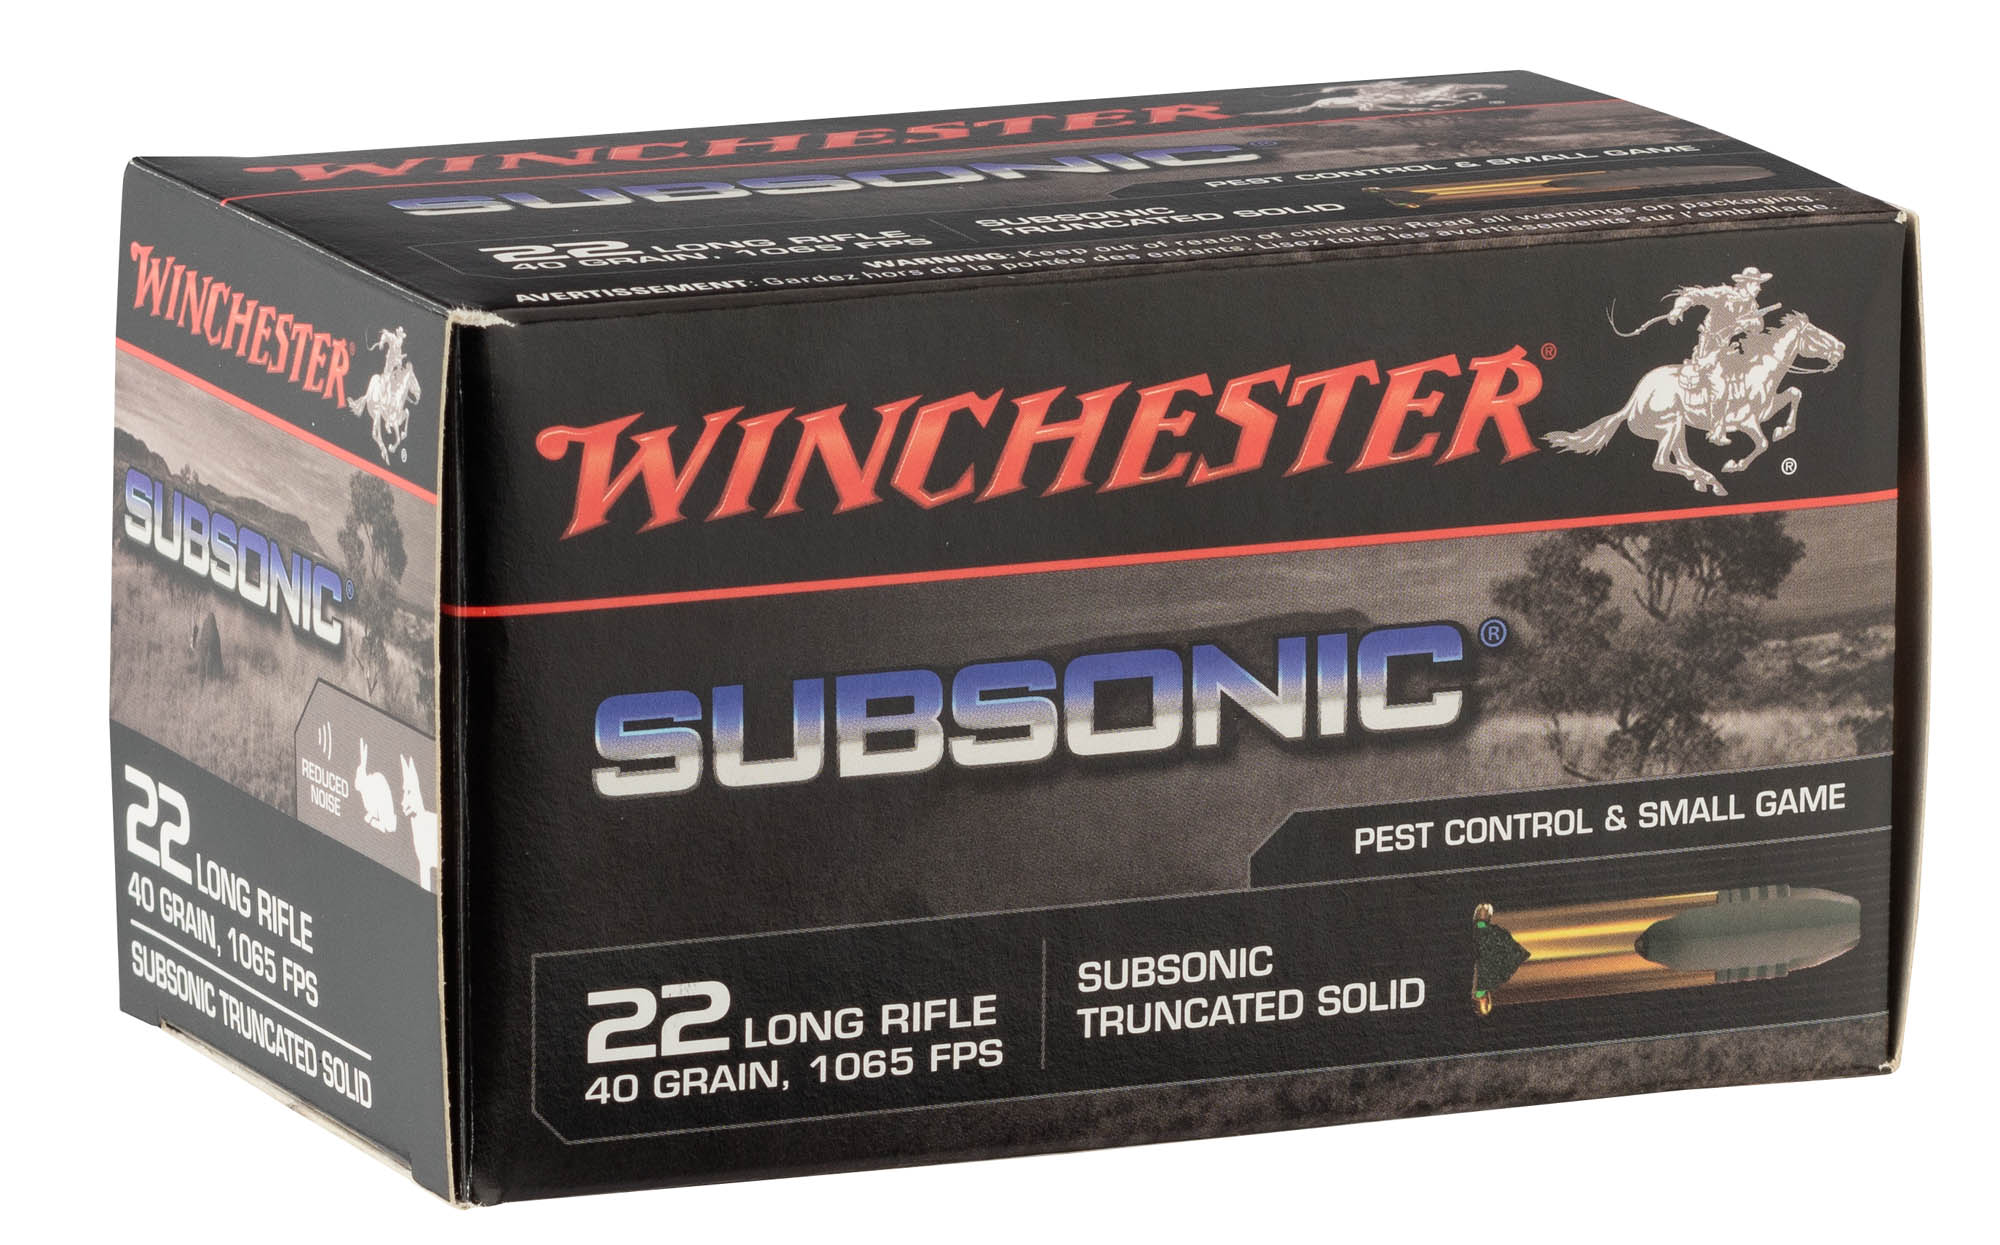 22 short subsonic rounds